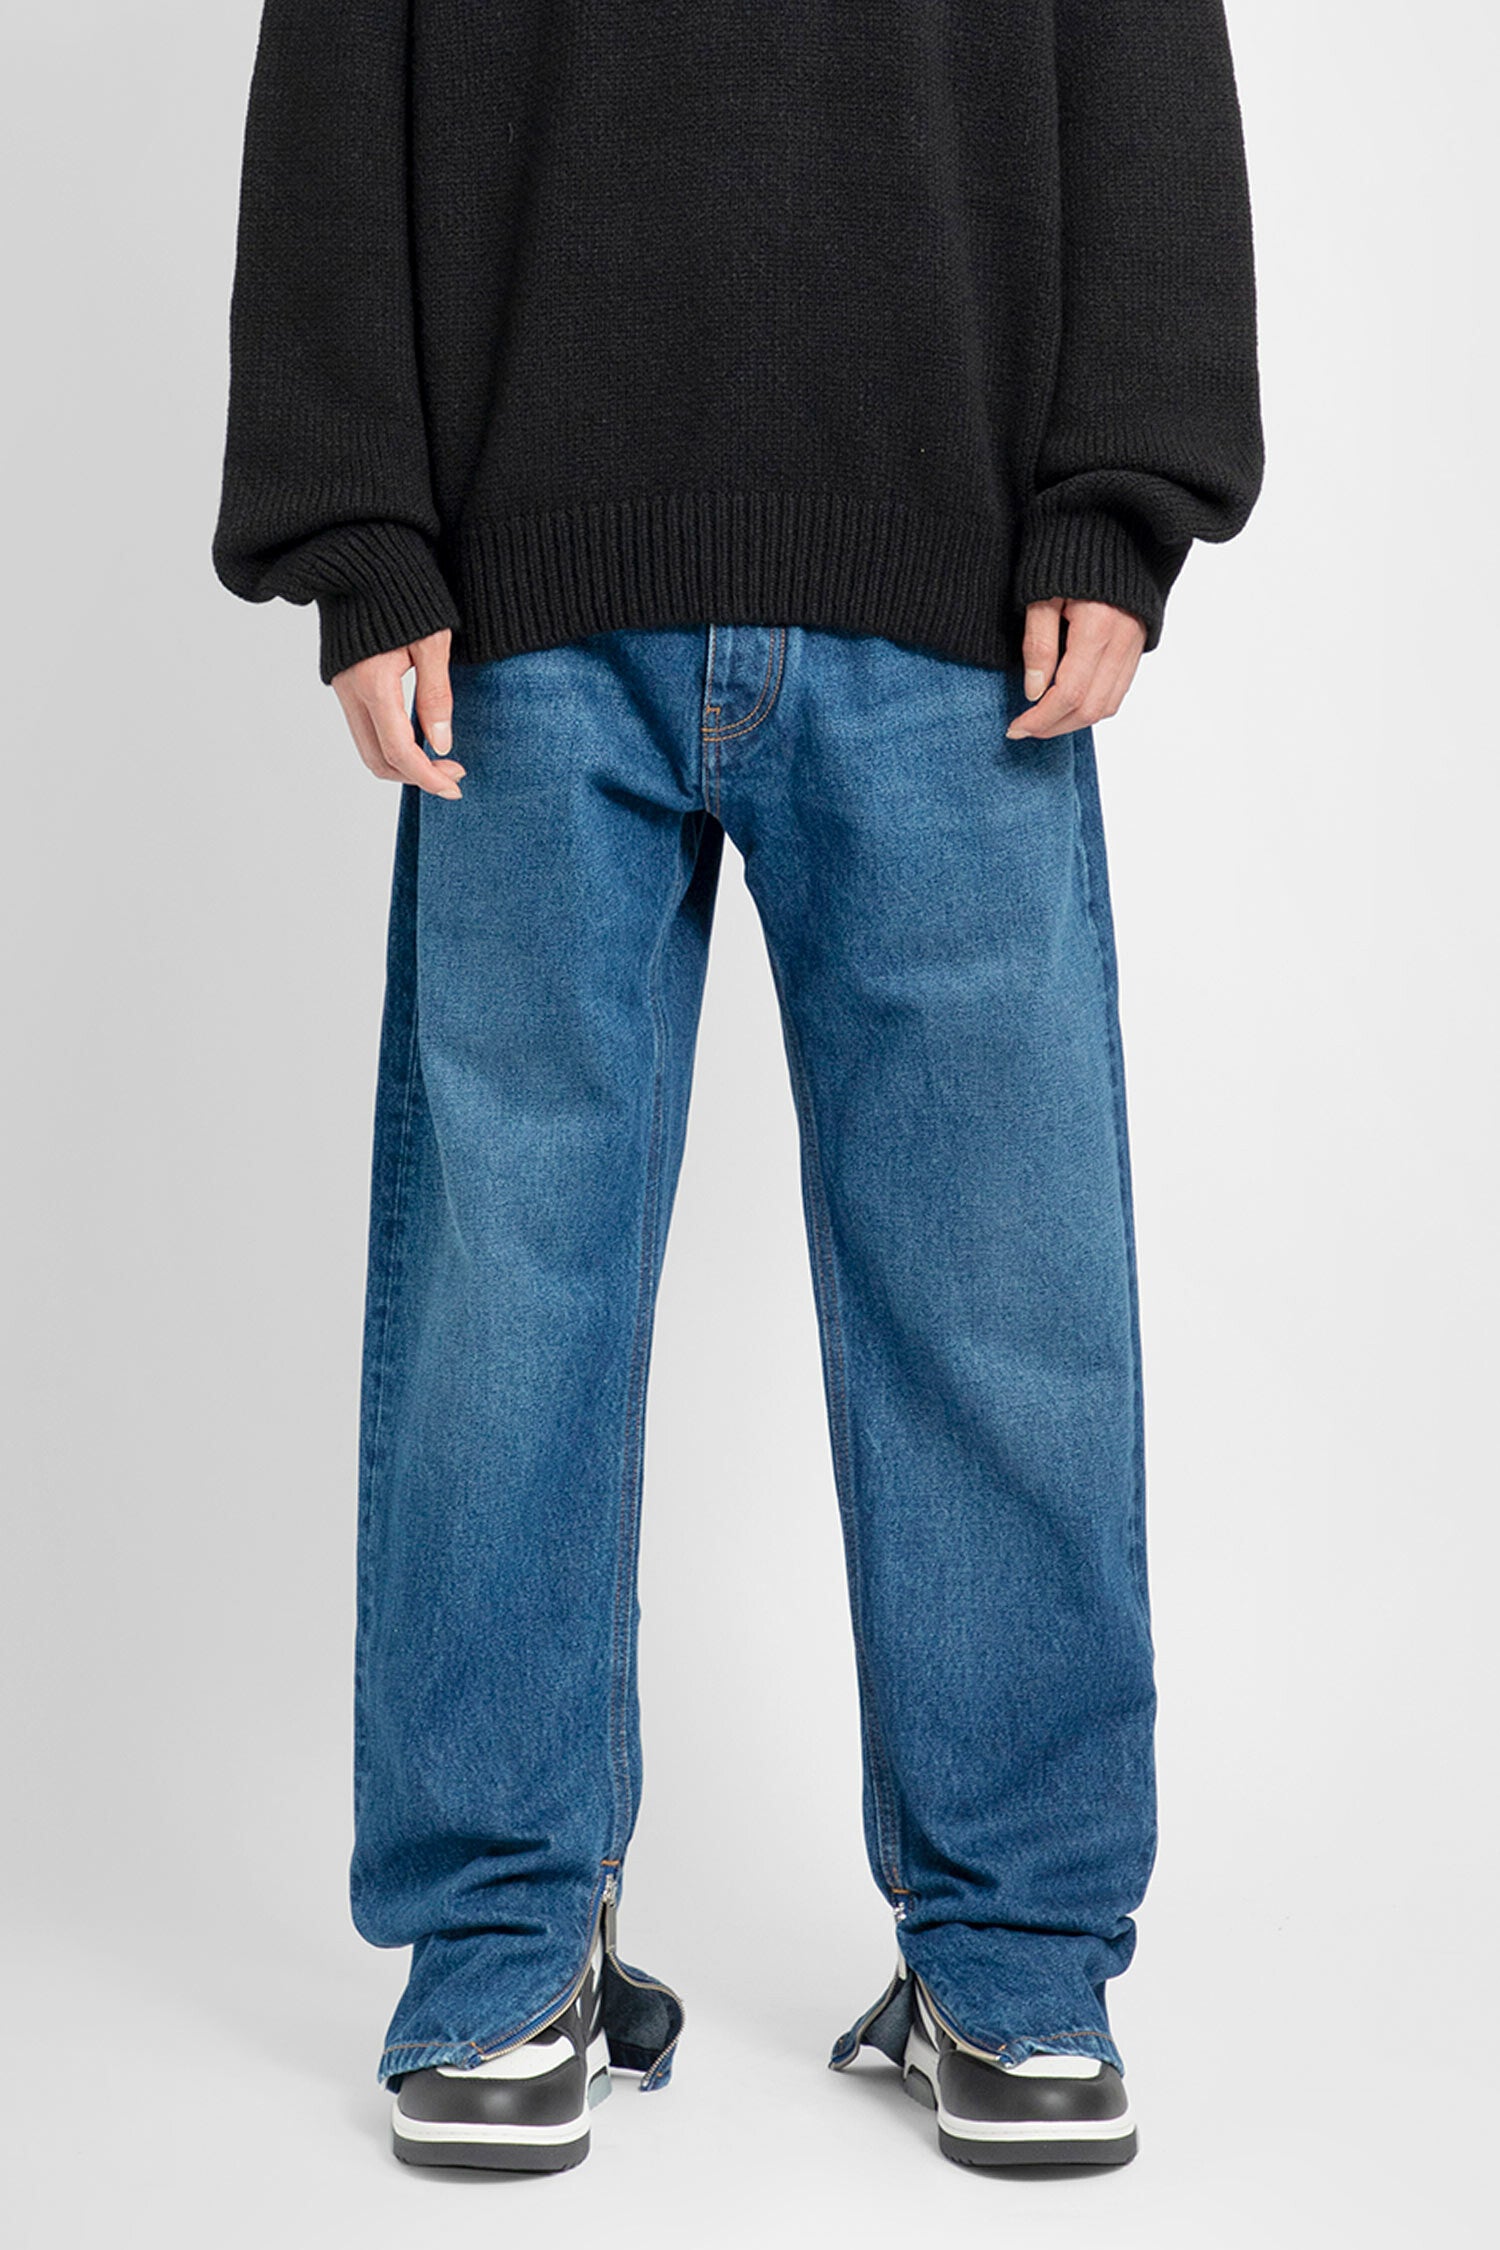 OFF-WHITE MAN BLUE JEANS